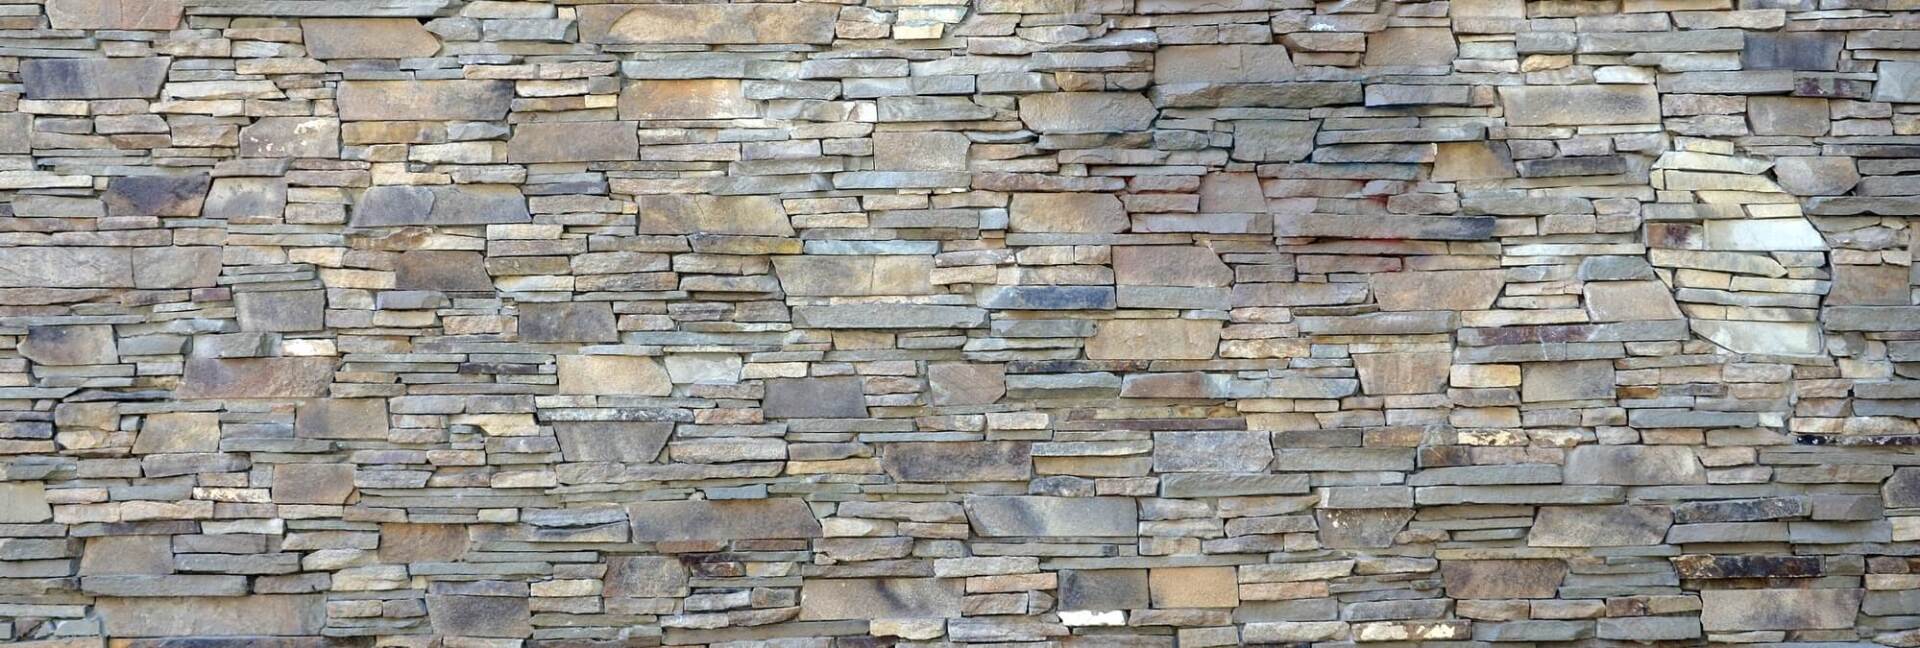 How to Use Mortared Stone for Your Retaining Walls